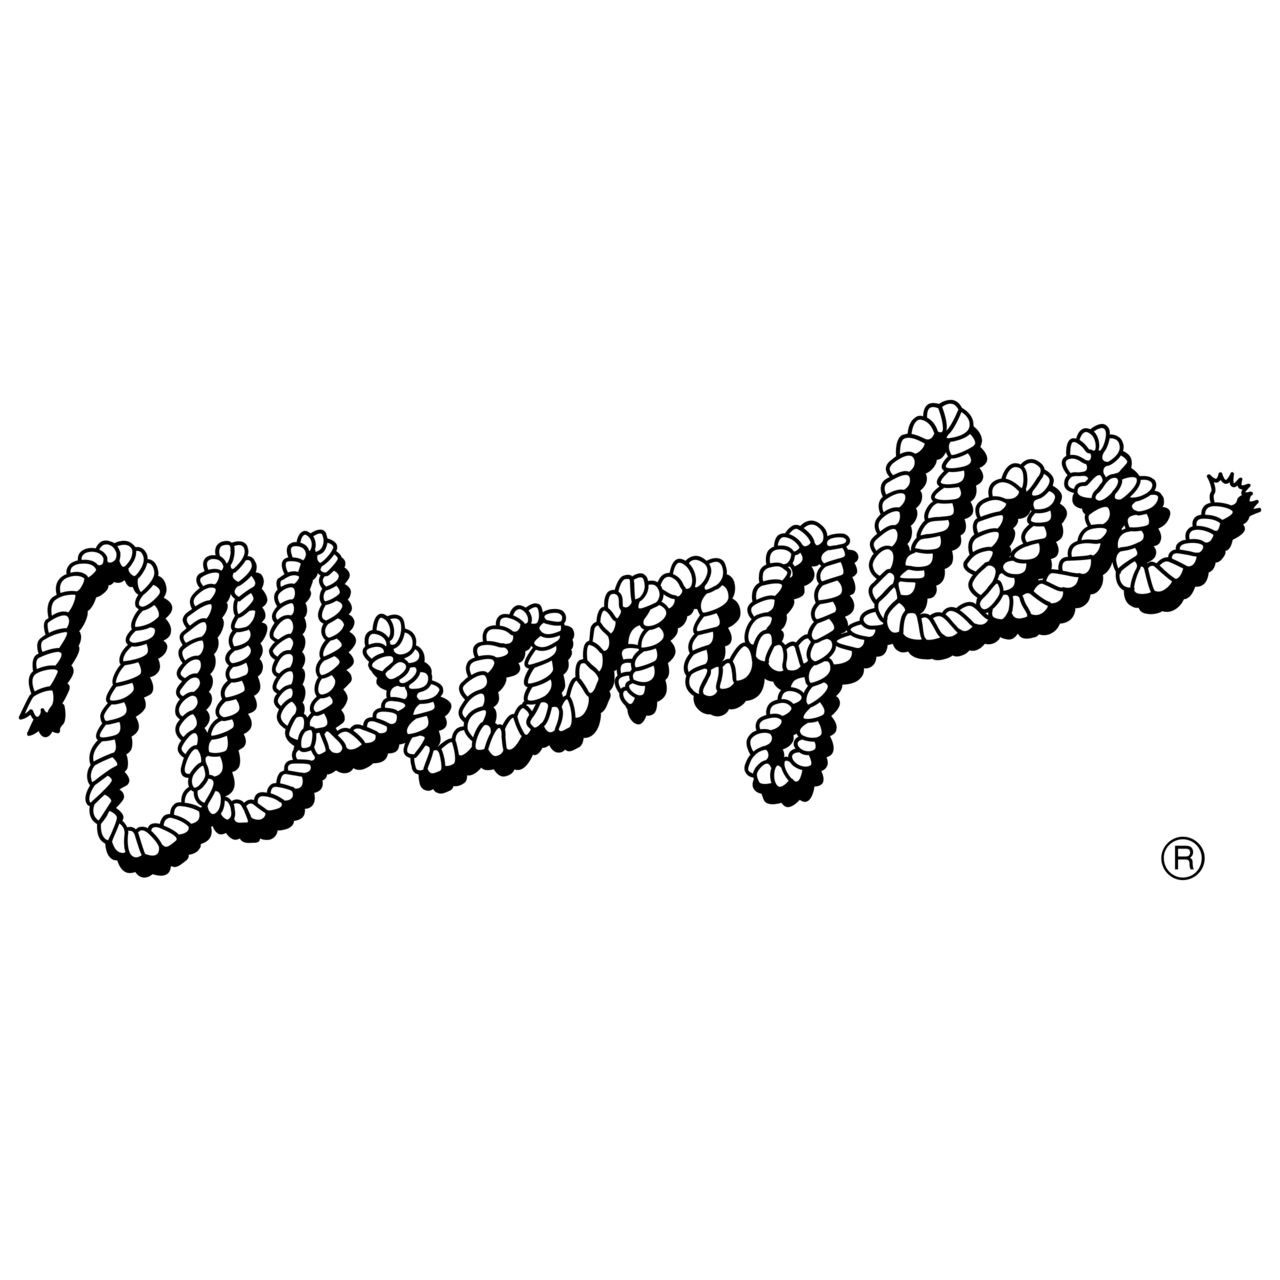 Download Wrangler Logo PNG and Vector (PDF, SVG, Ai, EPS) Free